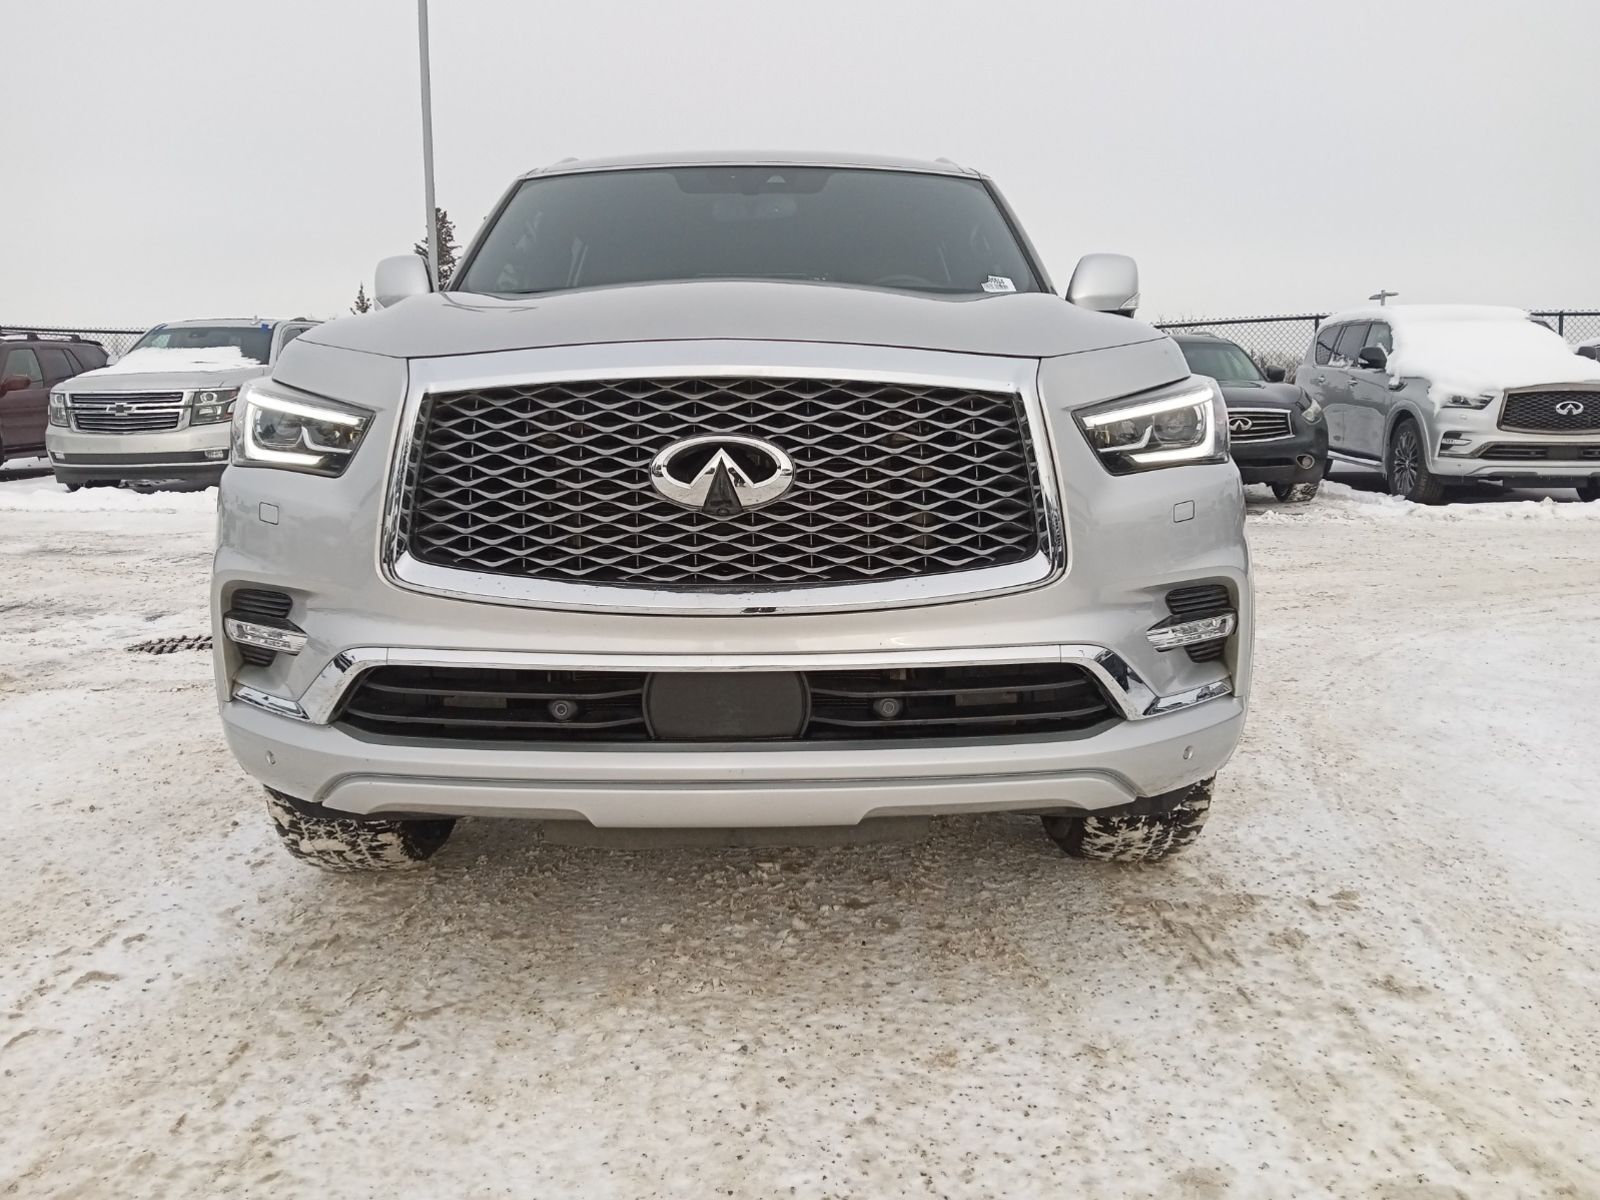 2022 Infiniti QX80 LUXE, 8-PASS, LEATHER, NAVIGATION, CPO AVAIL